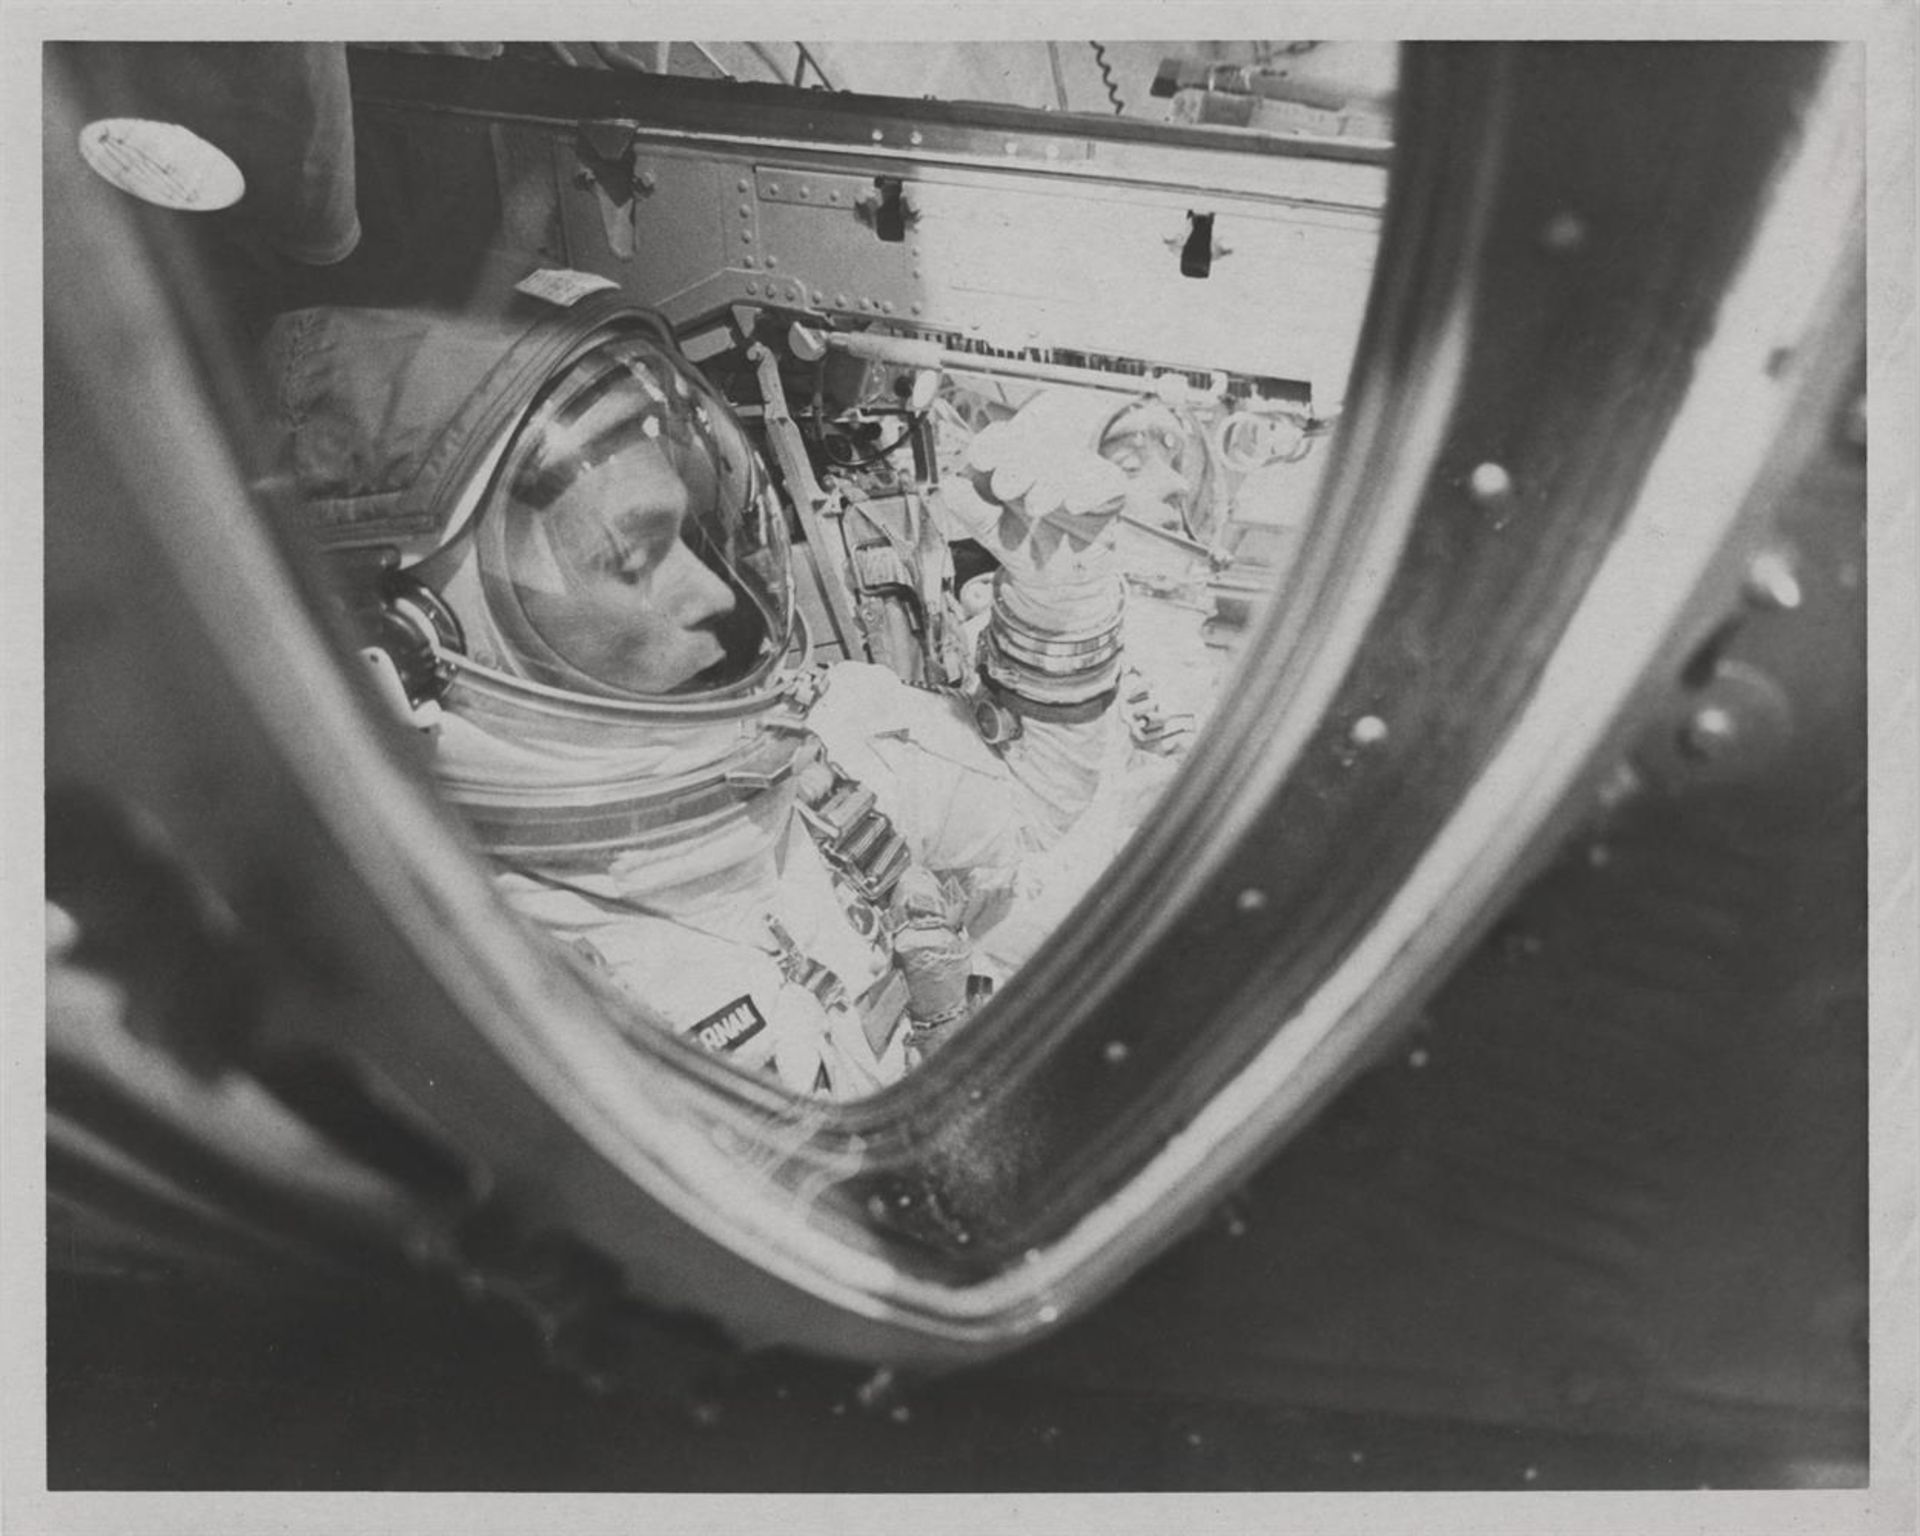 Immediate pre-launch activities of Eugene Cernan and Thomas Stafford (2 views), Gemini 9A, June 1966 - Image 4 of 5